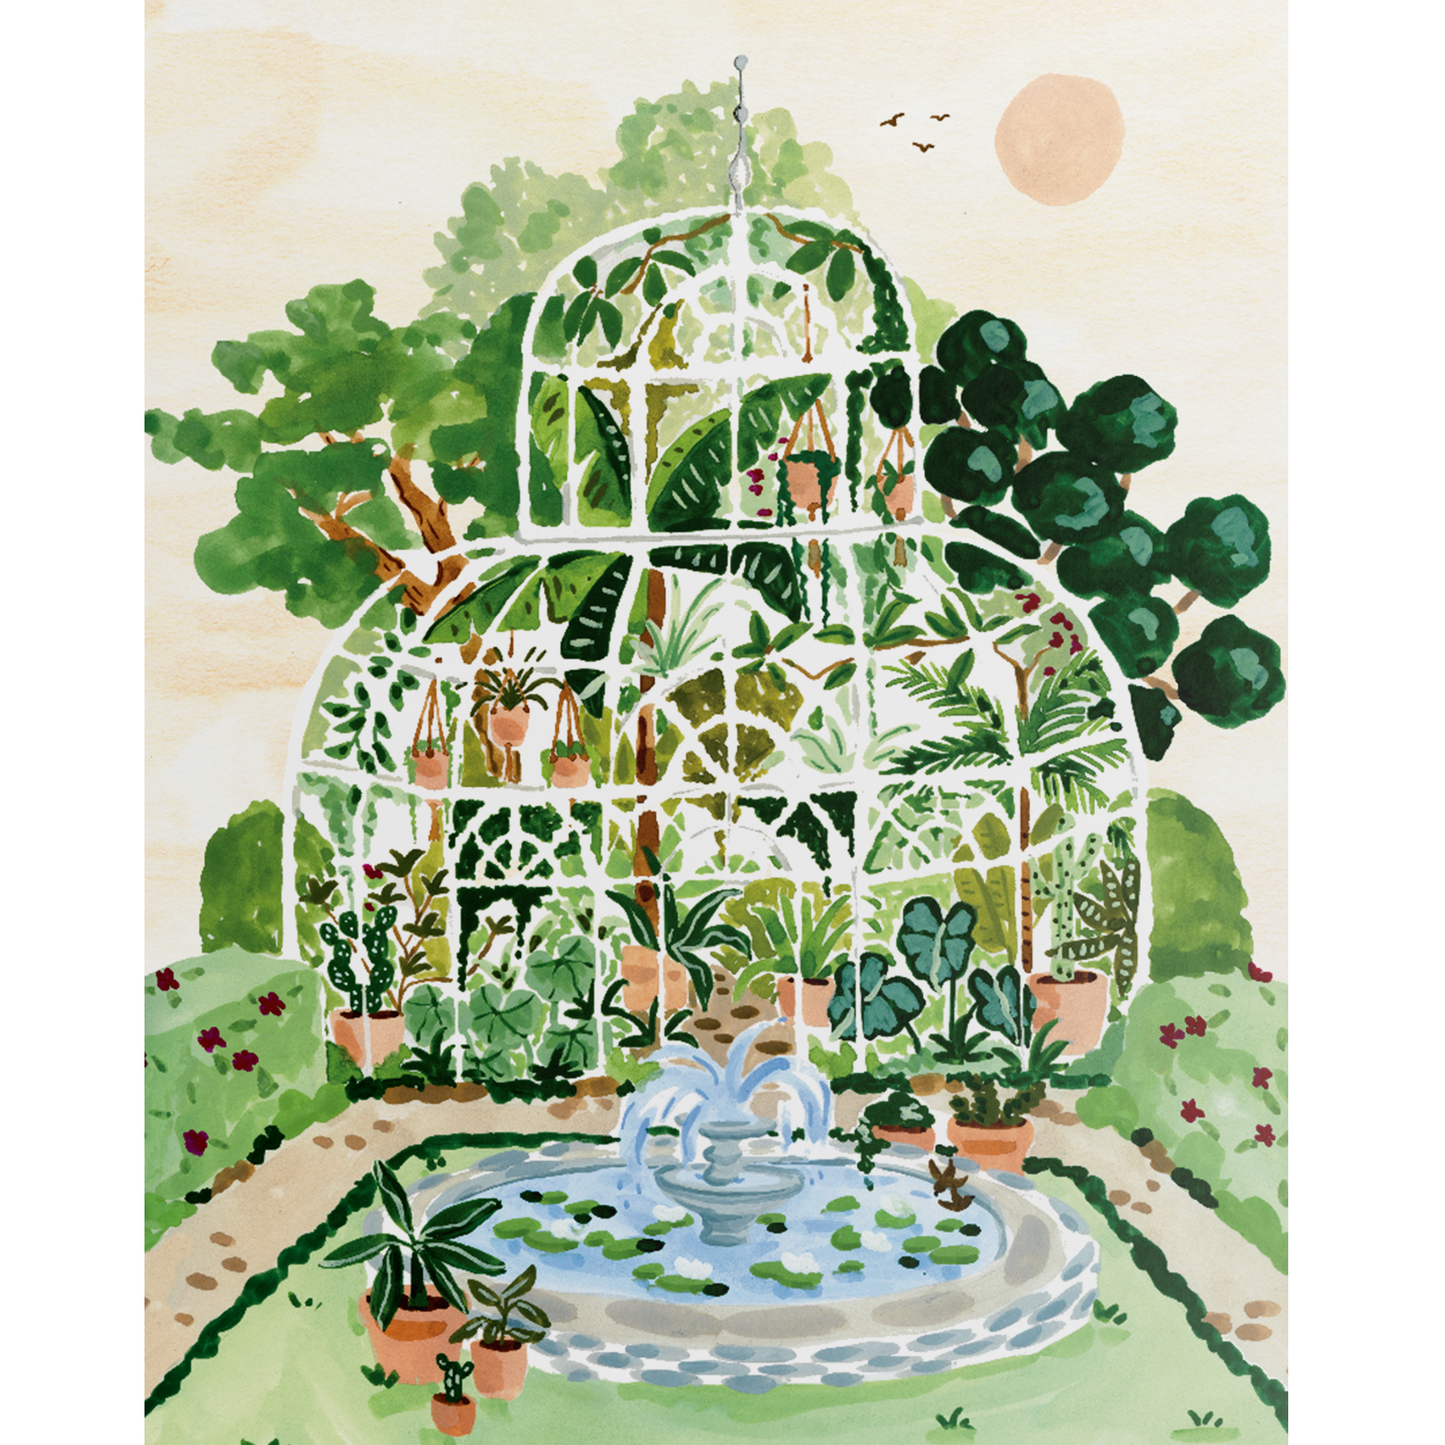 Full size image of Villager Puzzle | Greenhouse Garden designed by Sabina Fenn of Toronto Canada